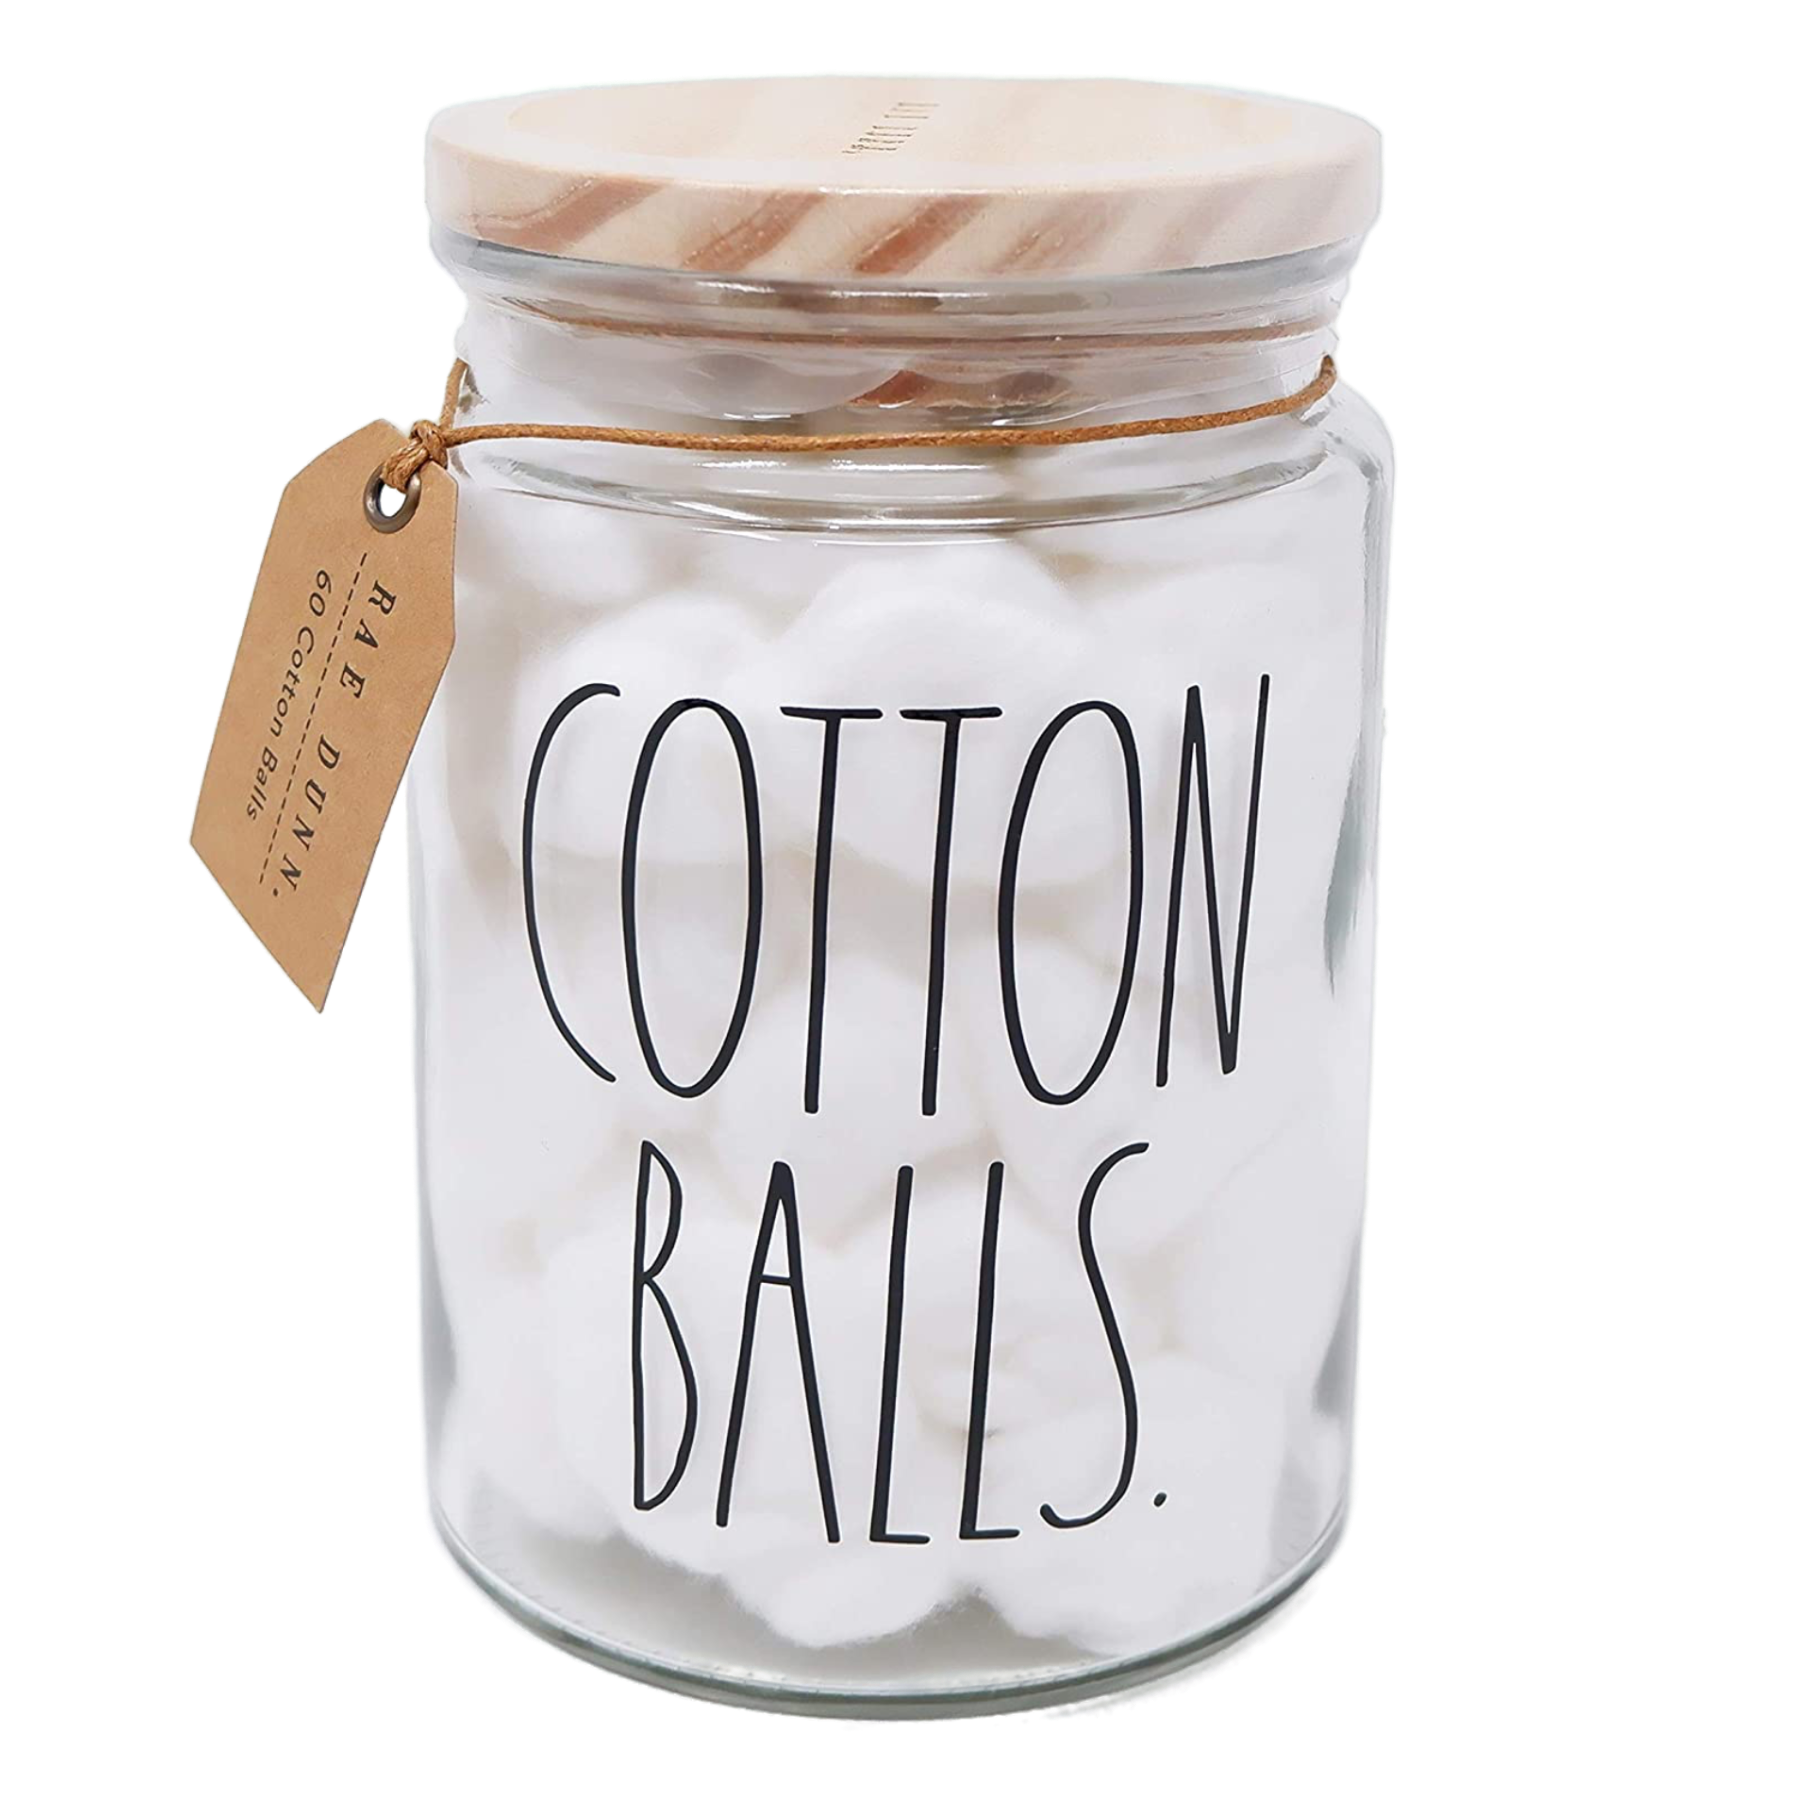 Rae Dunn COTTON BALLS Large Glass Jar/Canister With 60 Cotton Balls  Bathroom